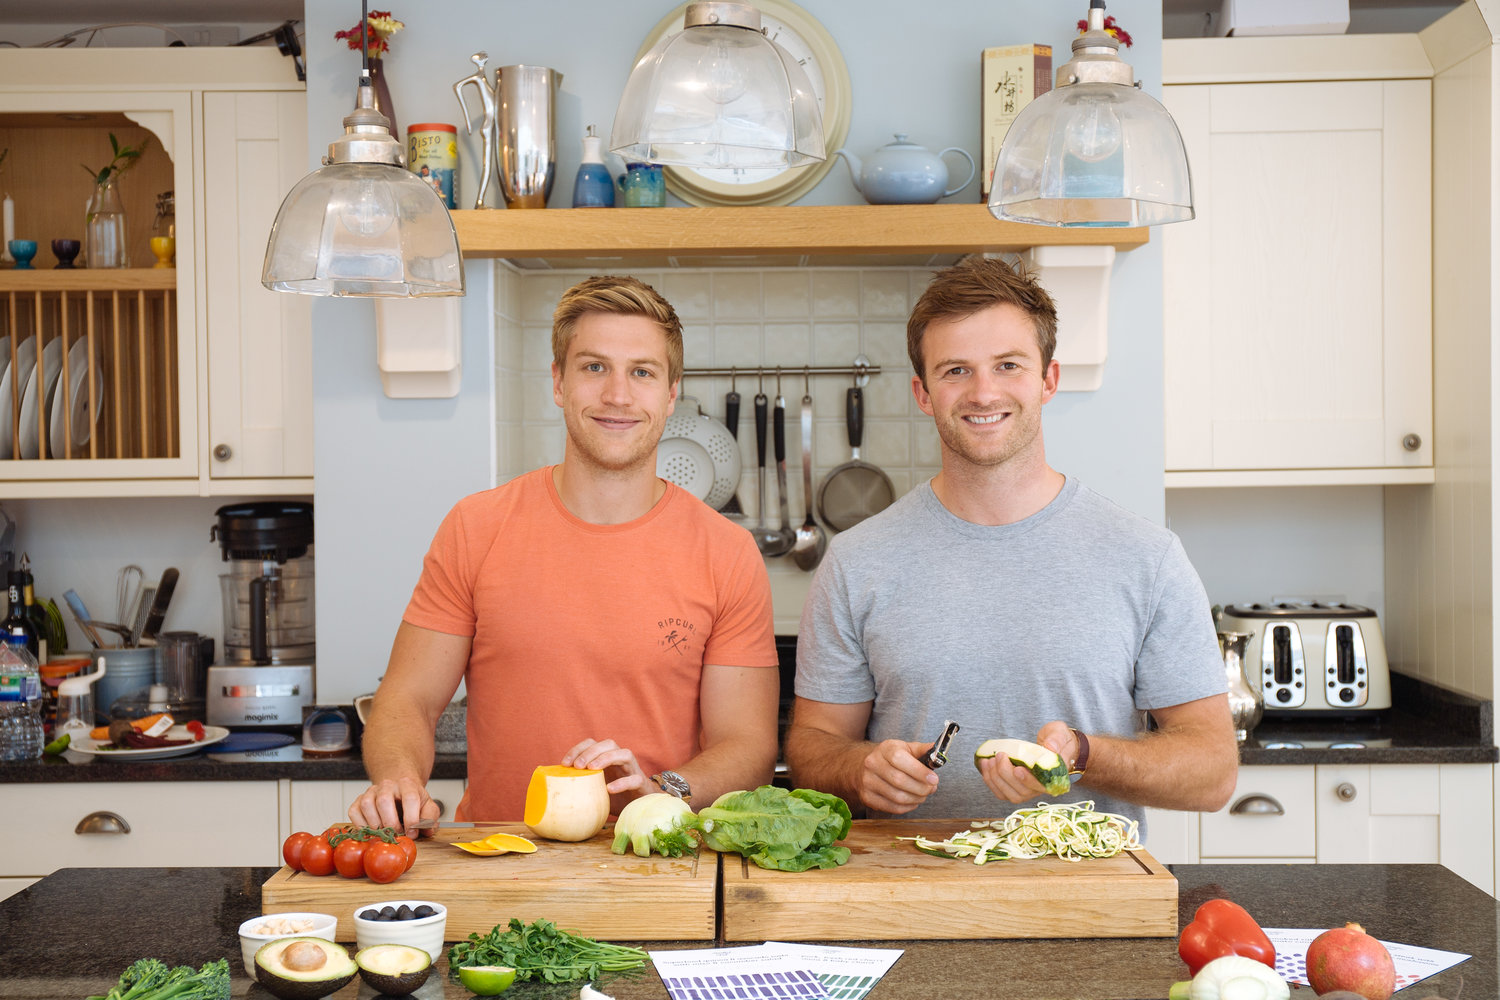 Podcast Episode 1, with Myles and Giles, co-founders of Mindful Chef